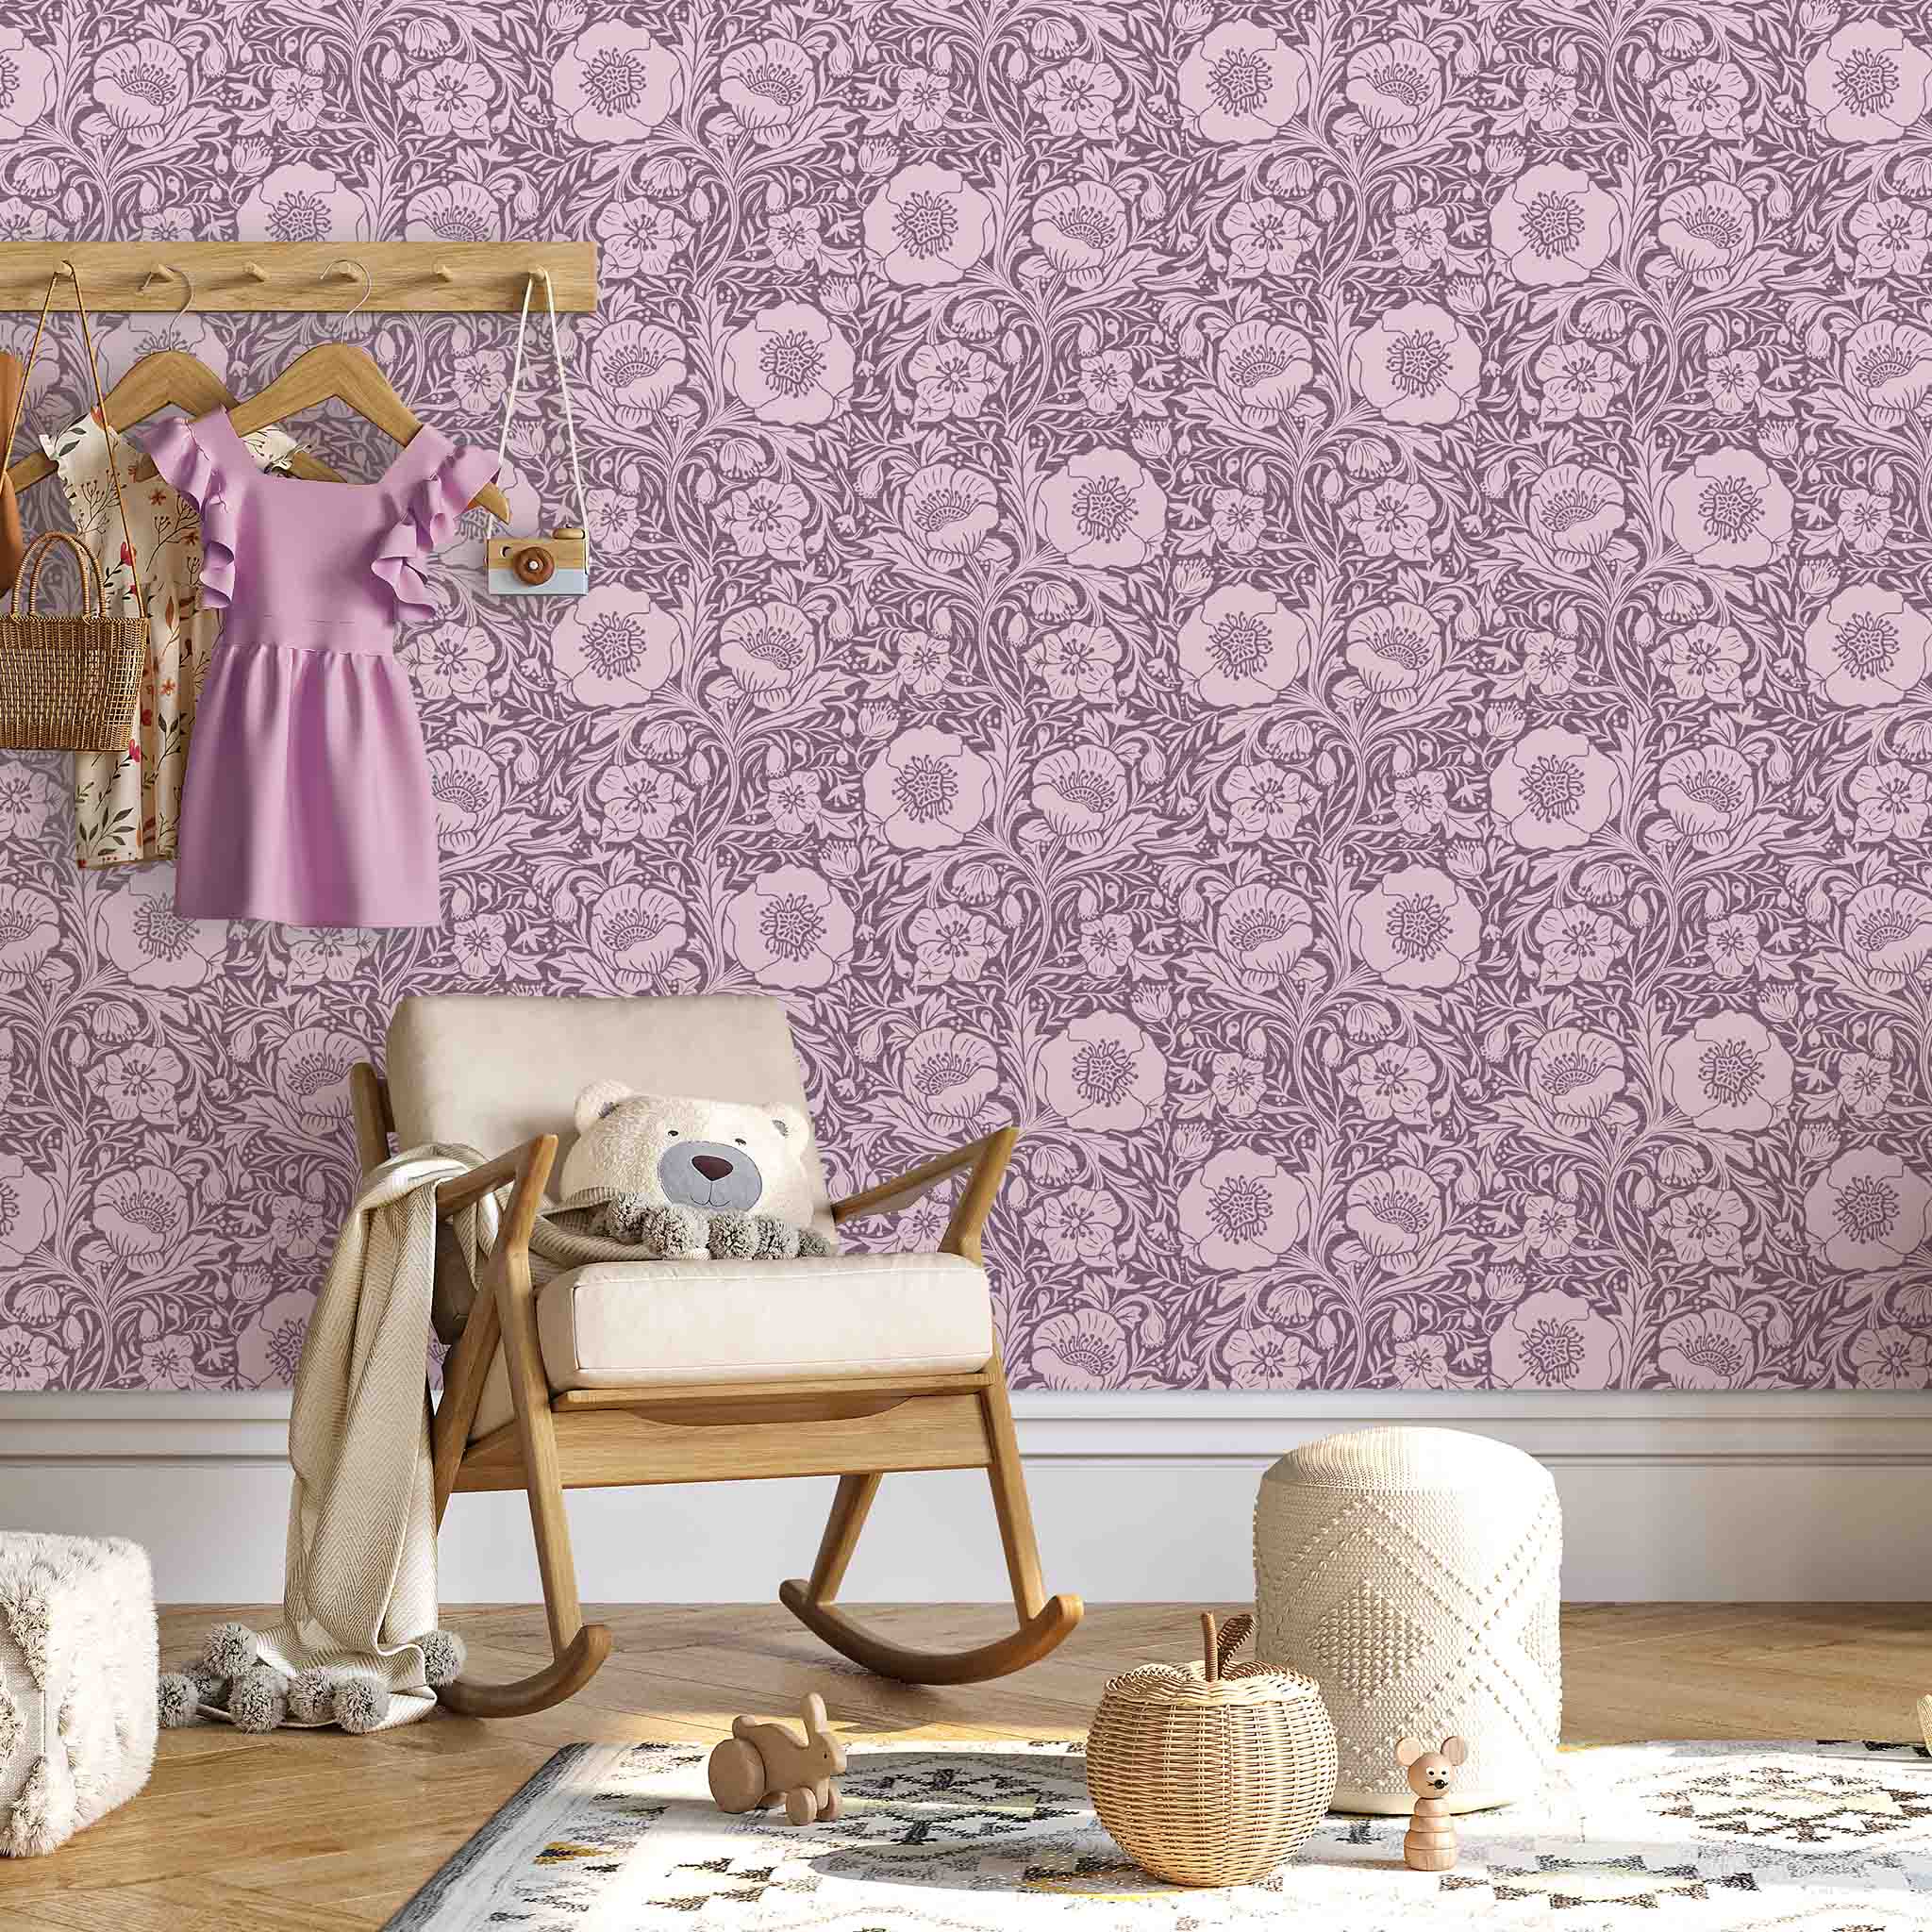 Purple Poppy Pattern Pre-Pasted Removable Wallpaper in a Child's Room